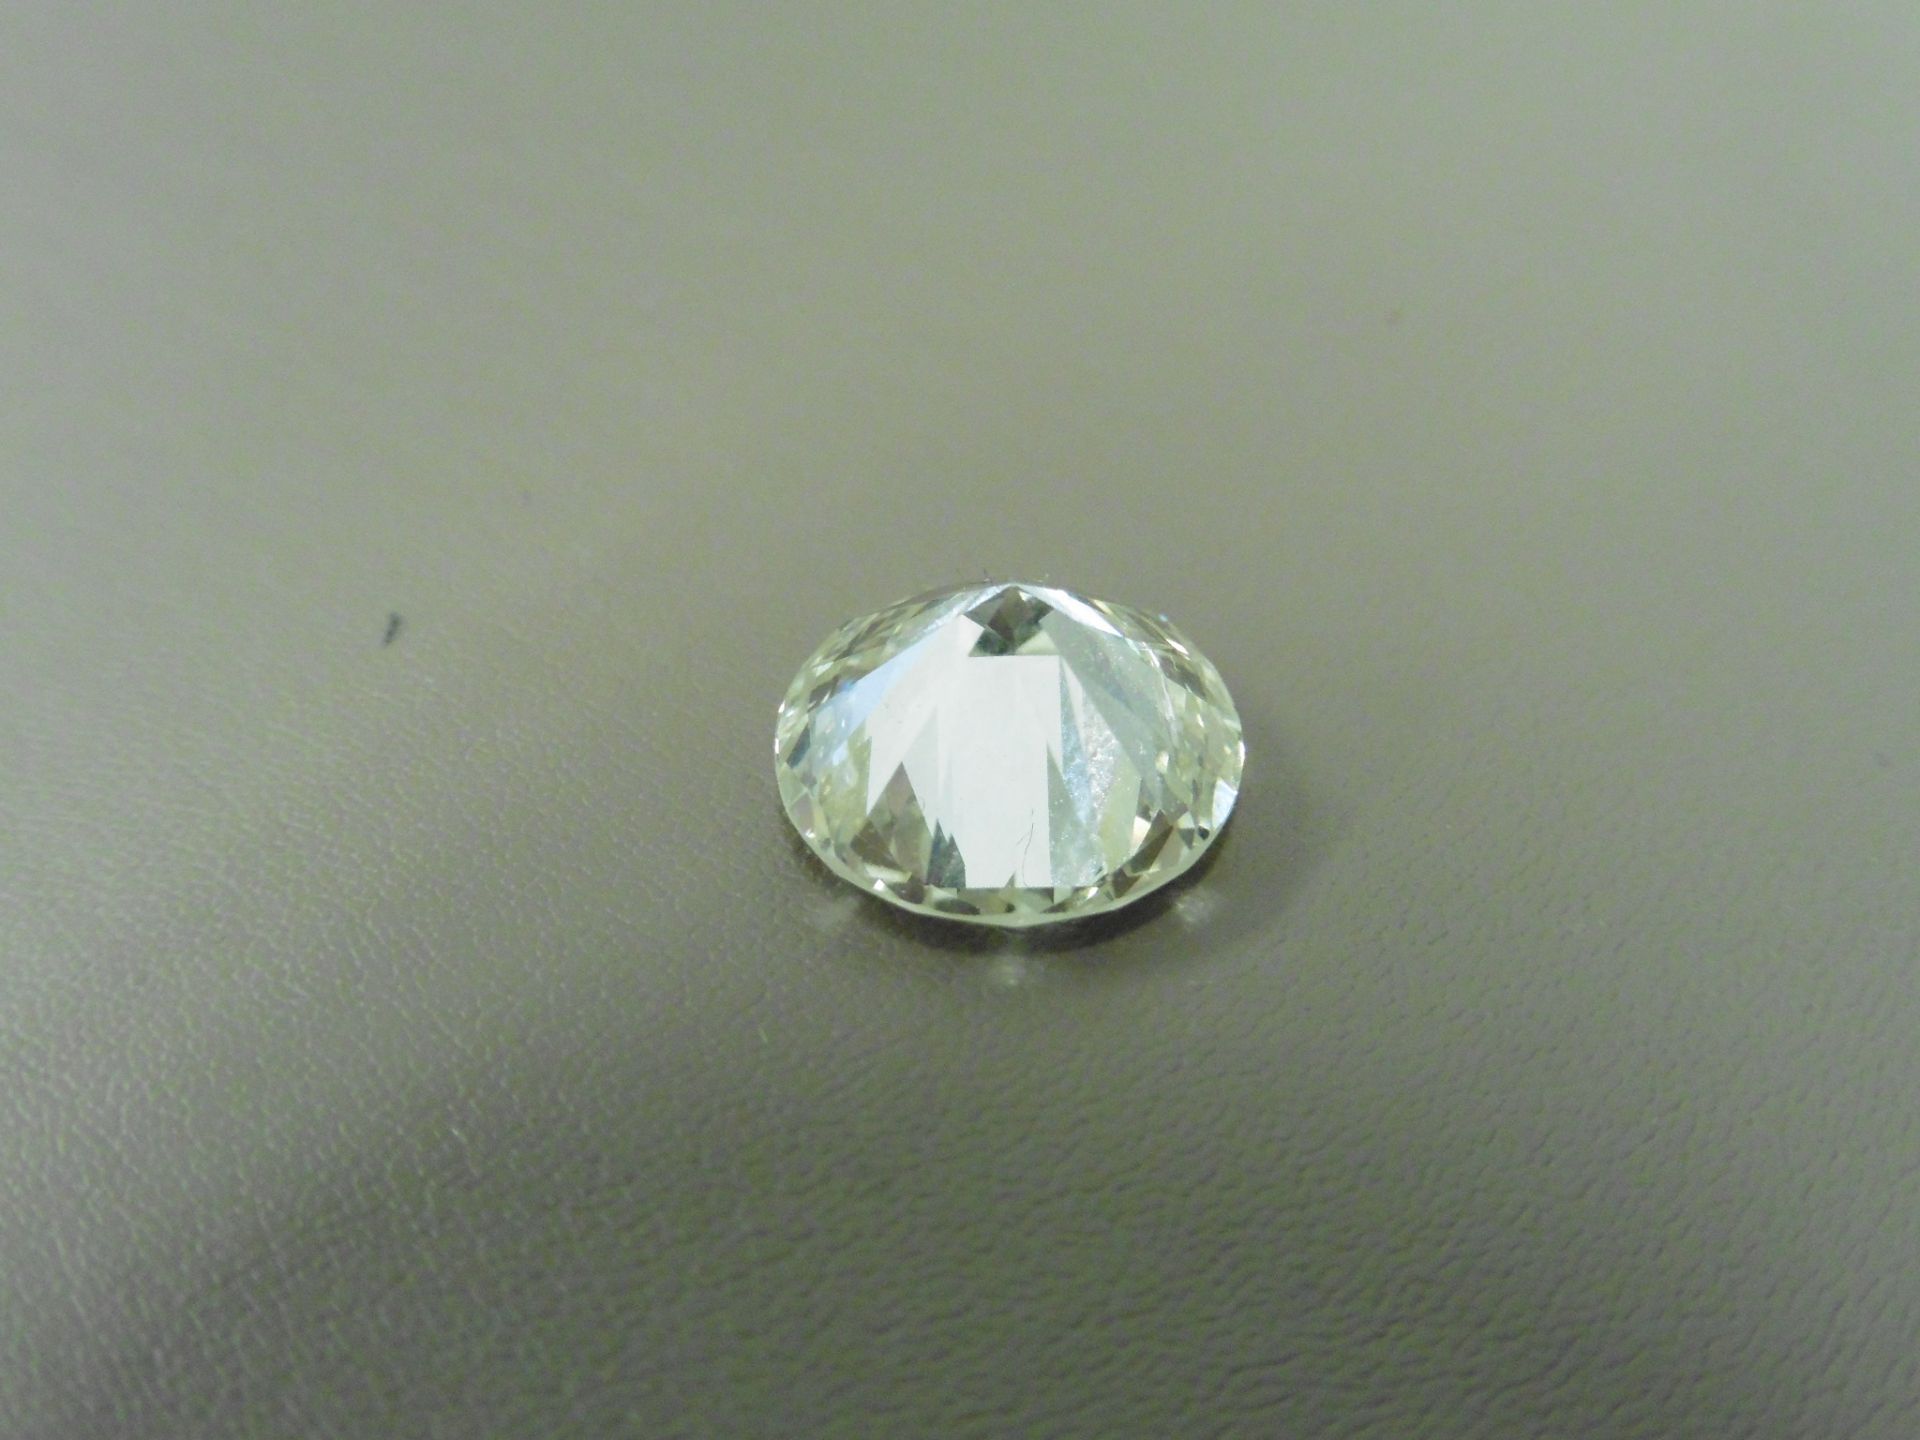 6.38ct natural loose brilliant cut diamond. K colourand I1 clarity. EGL certification. Valued at £ - Image 4 of 5